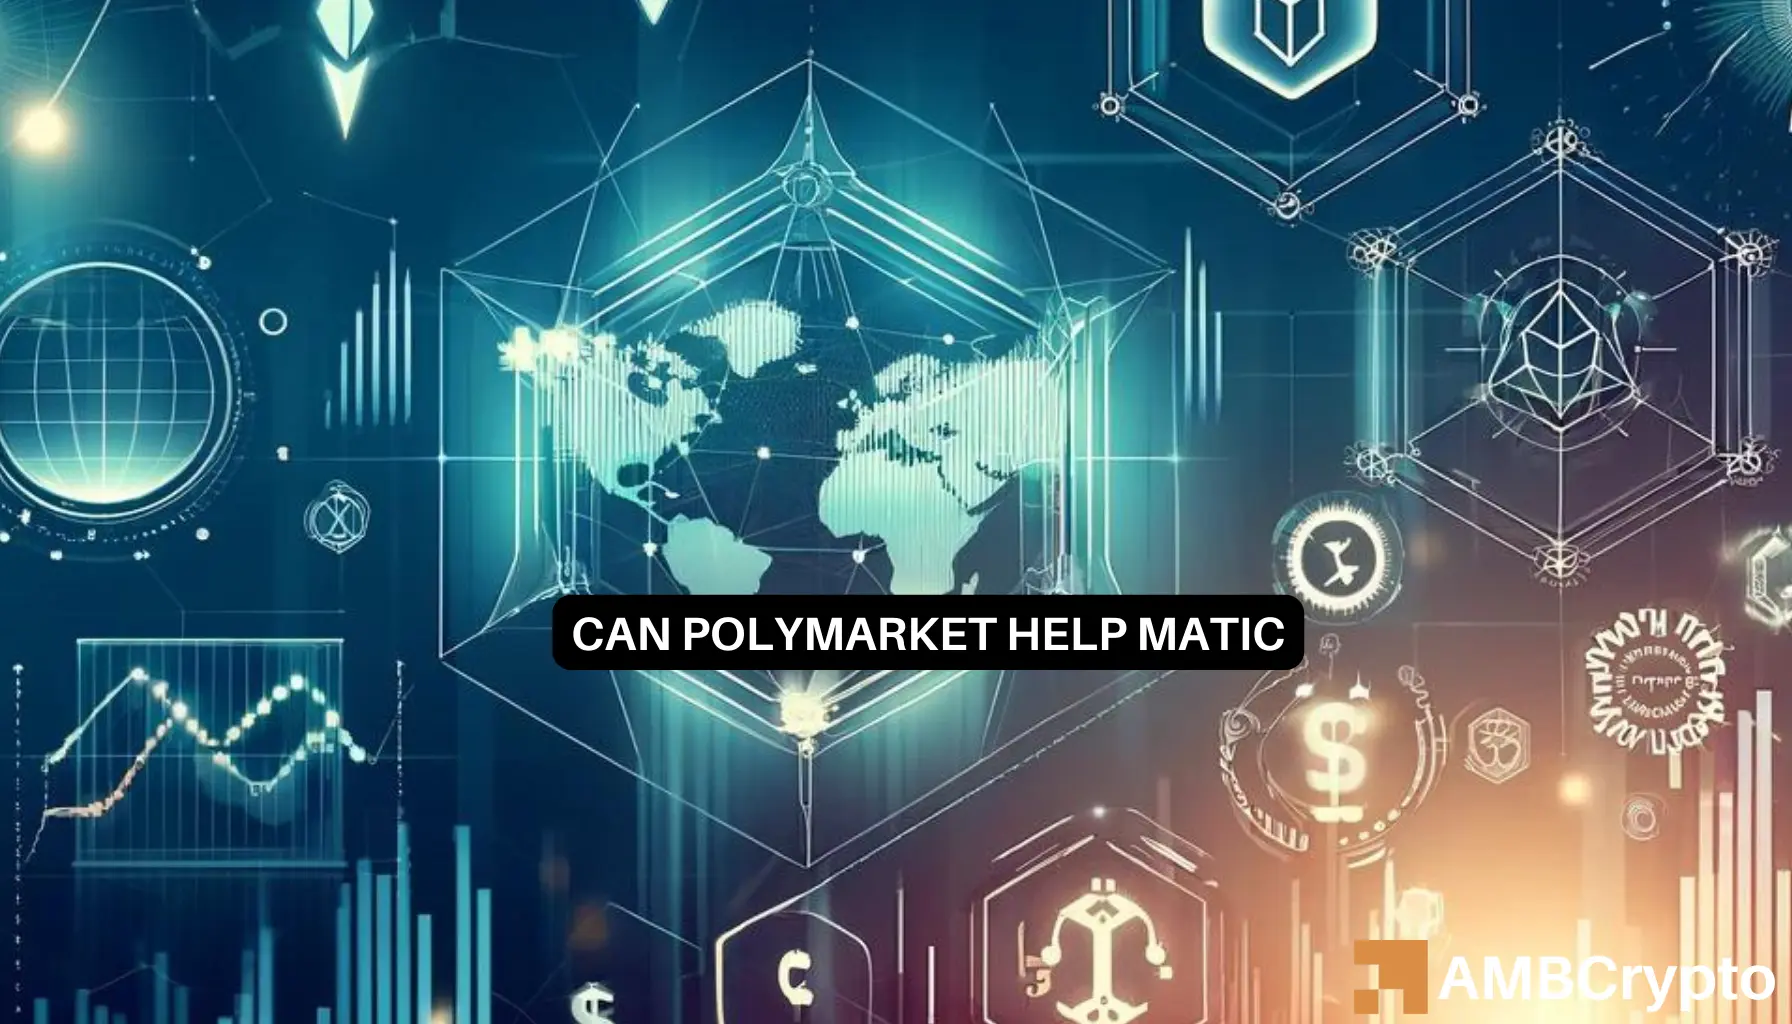 U.S Election bets soar on Polymarket – Is that good news for Polygon?